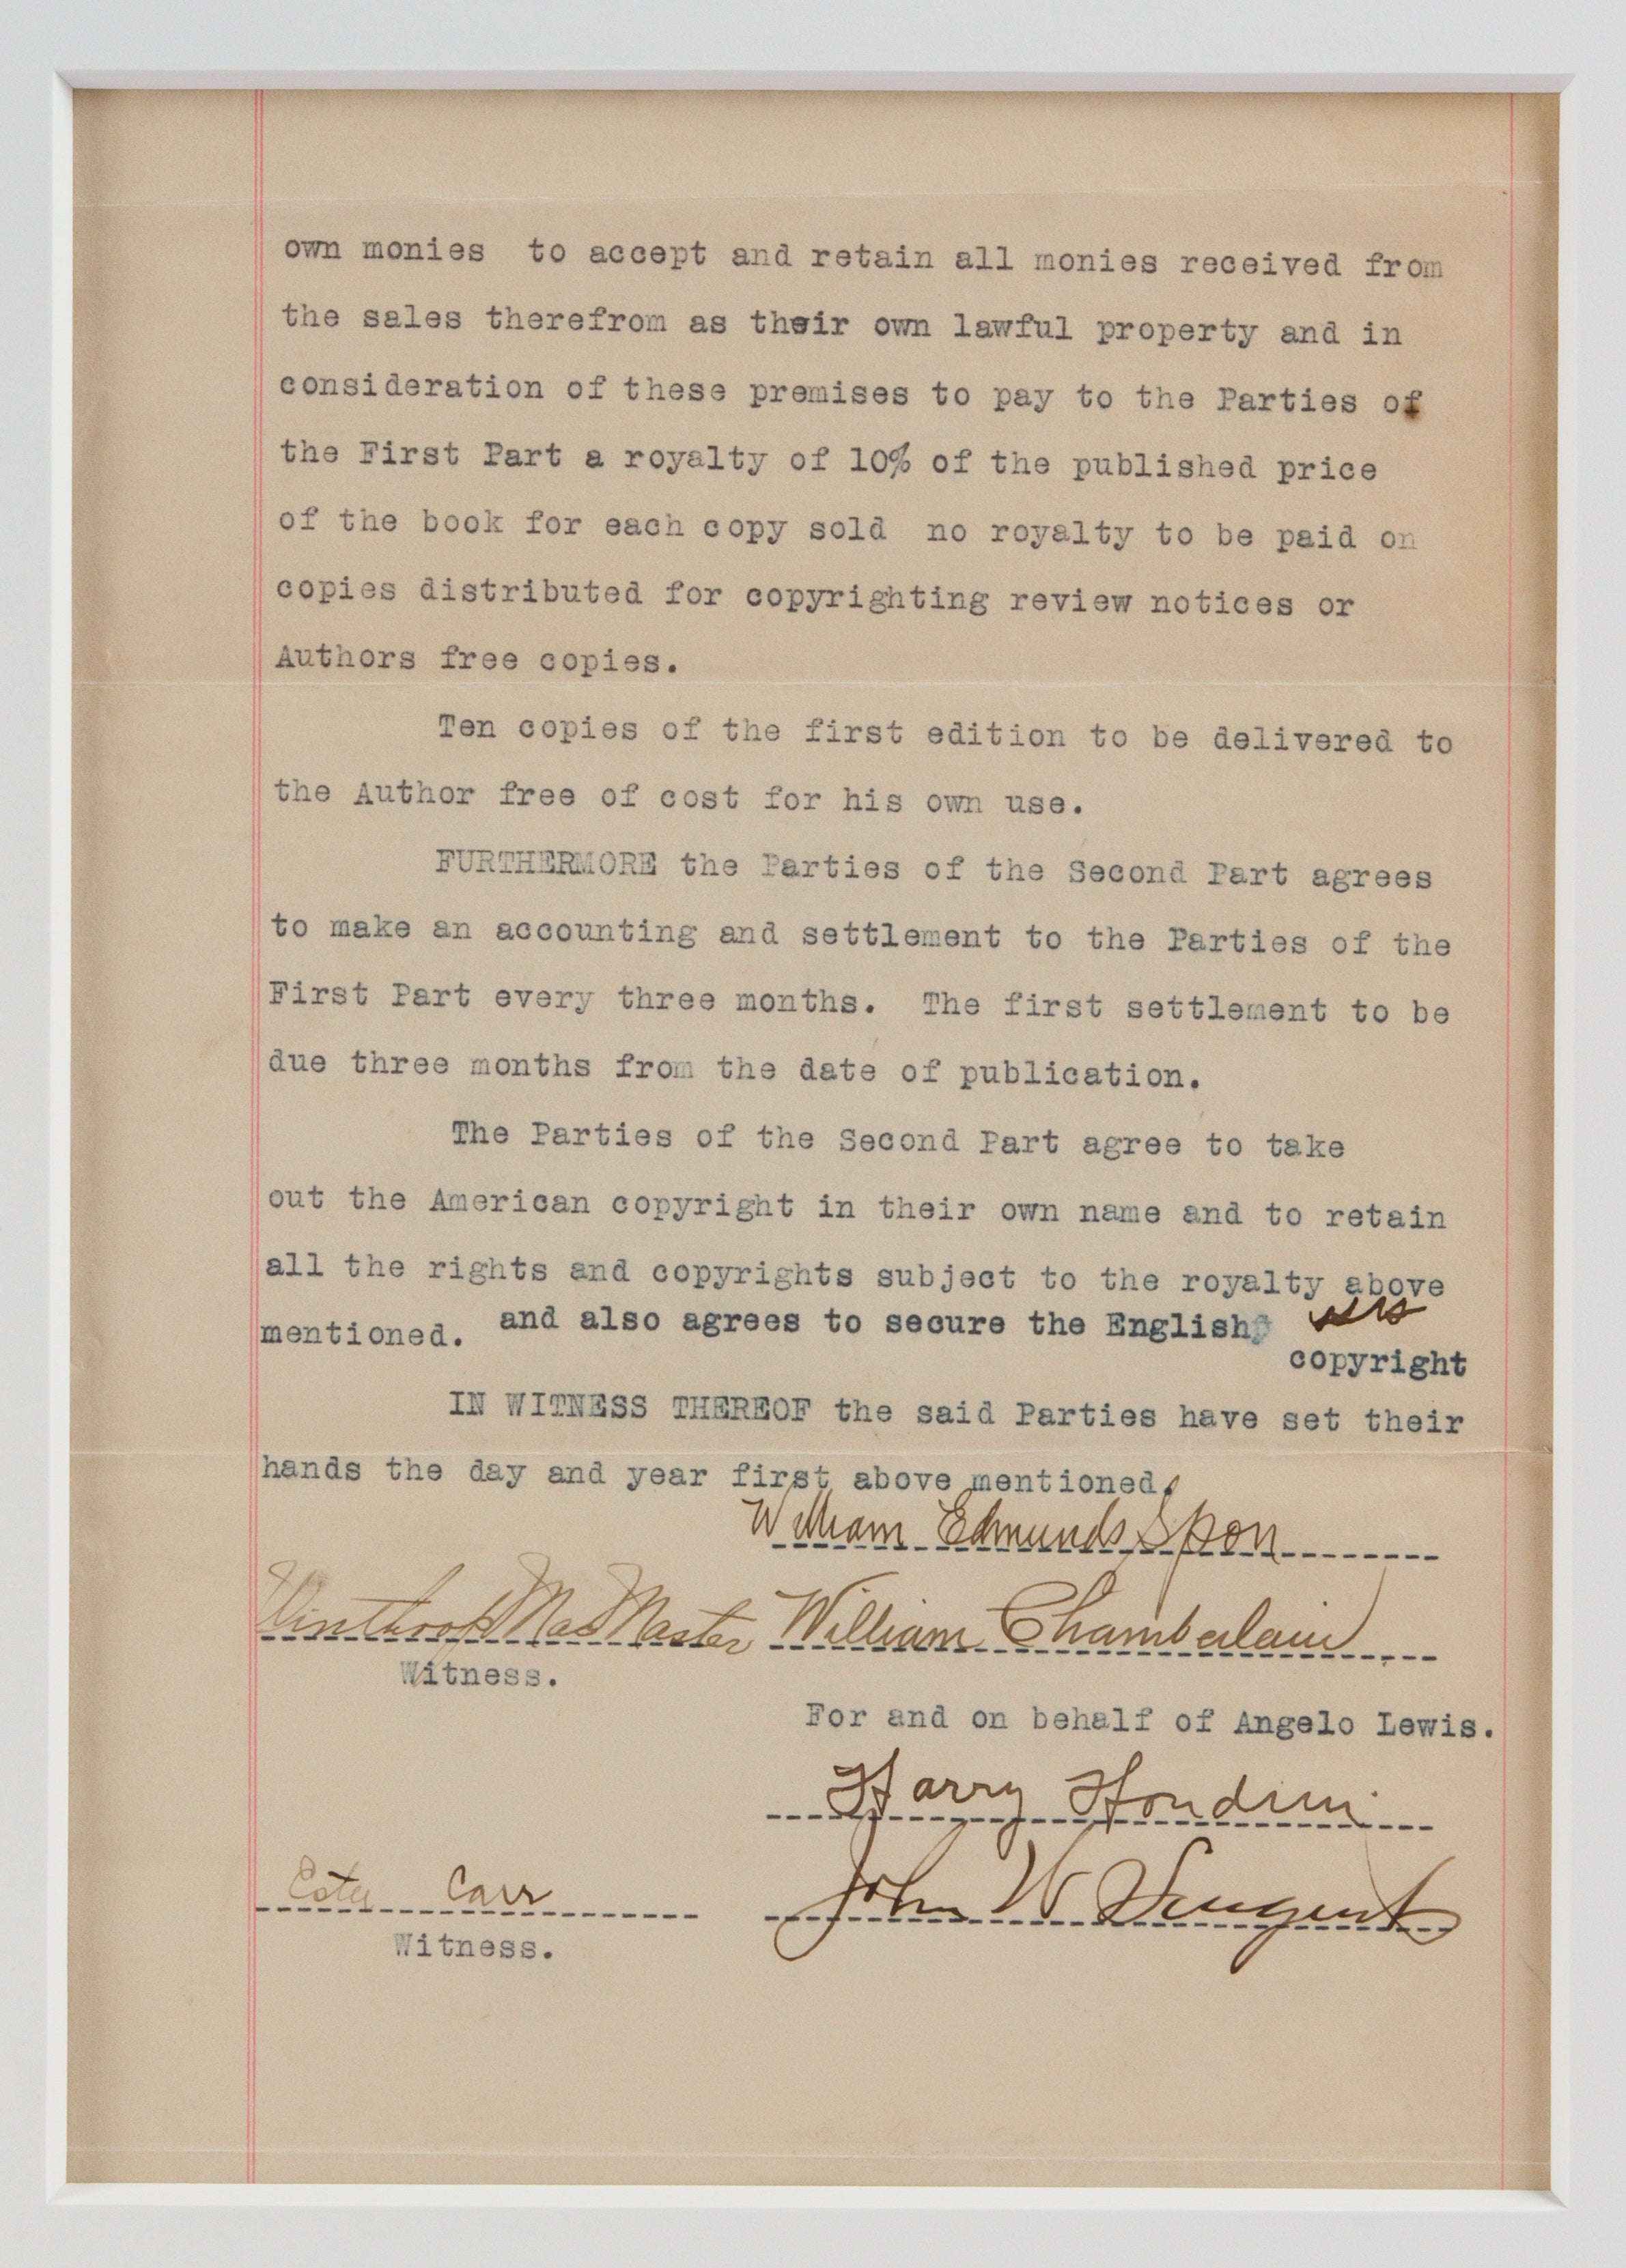 Rare Harry Houdini Signed 1918 Literary Contract: “I always have on my mind...”